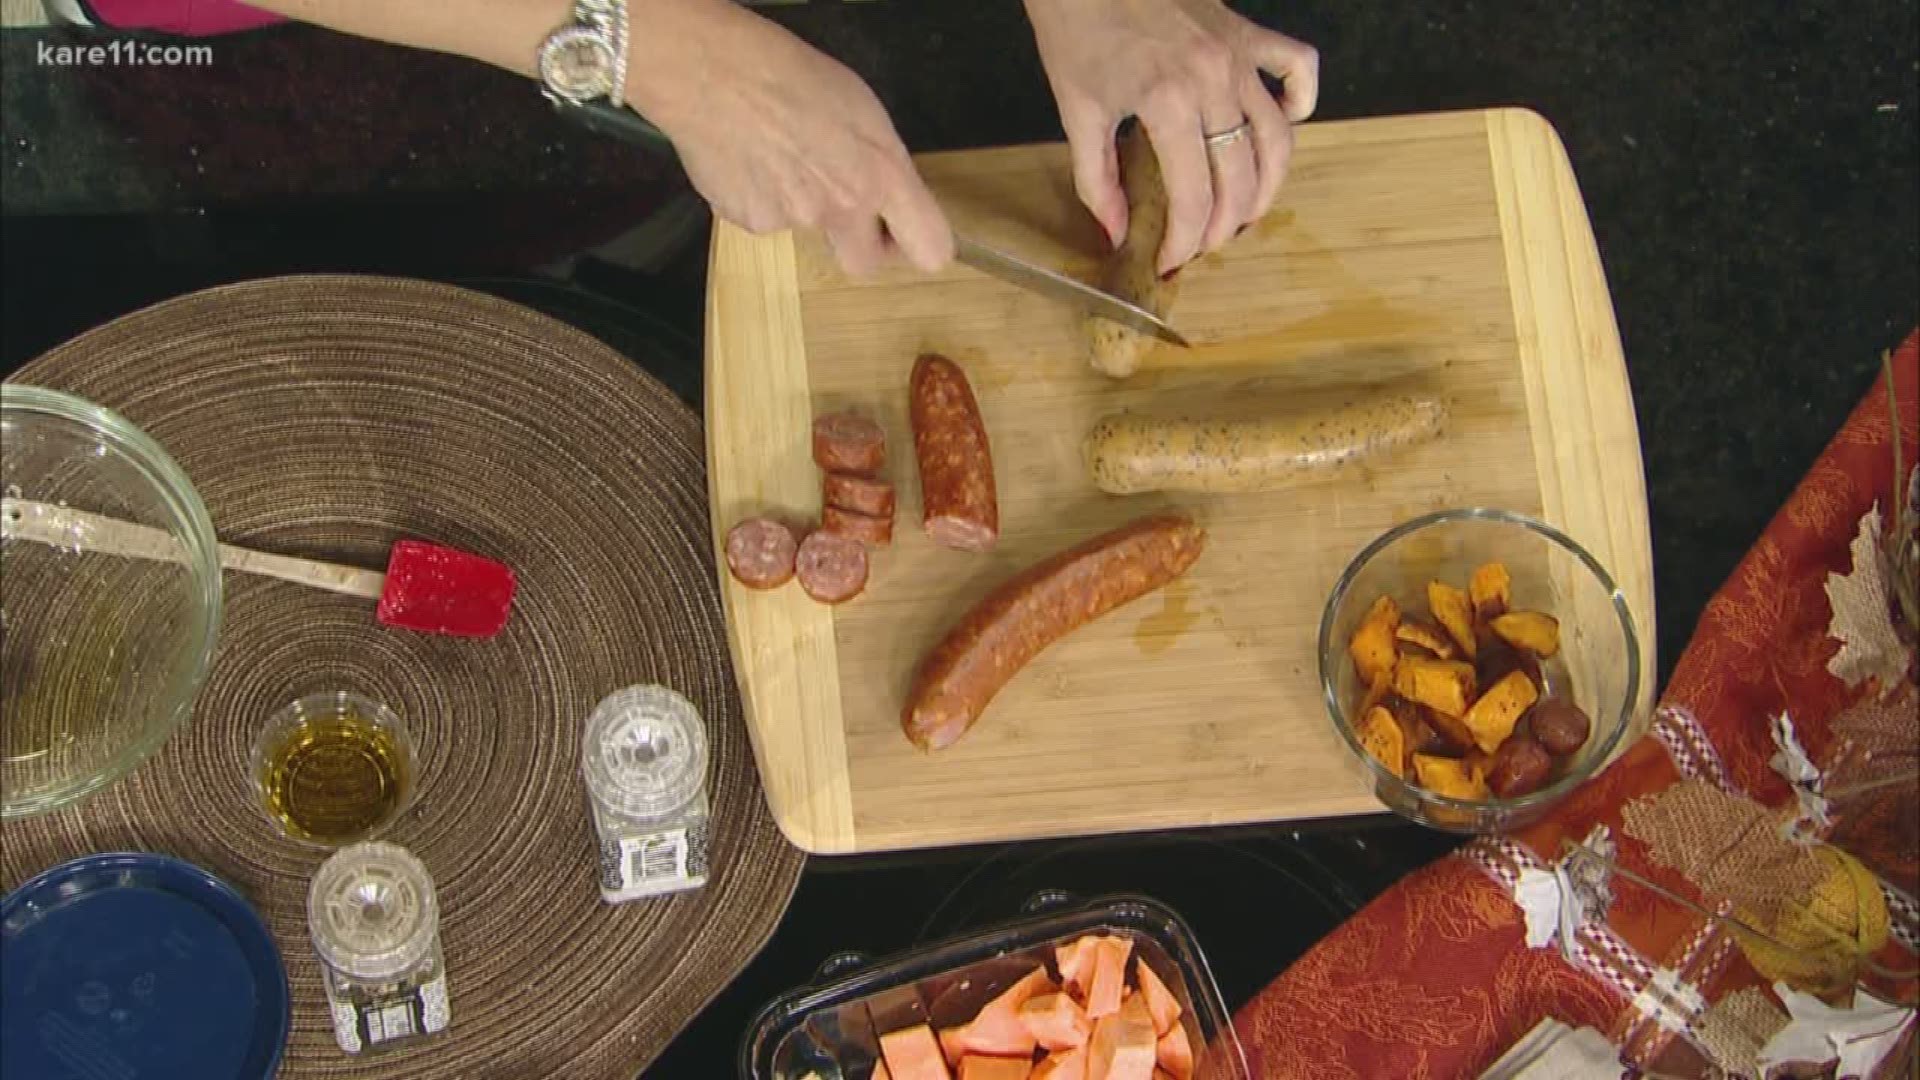 Kowalkski's was in-studio to share a tasty appetizer for your Thanksgiving festivities.